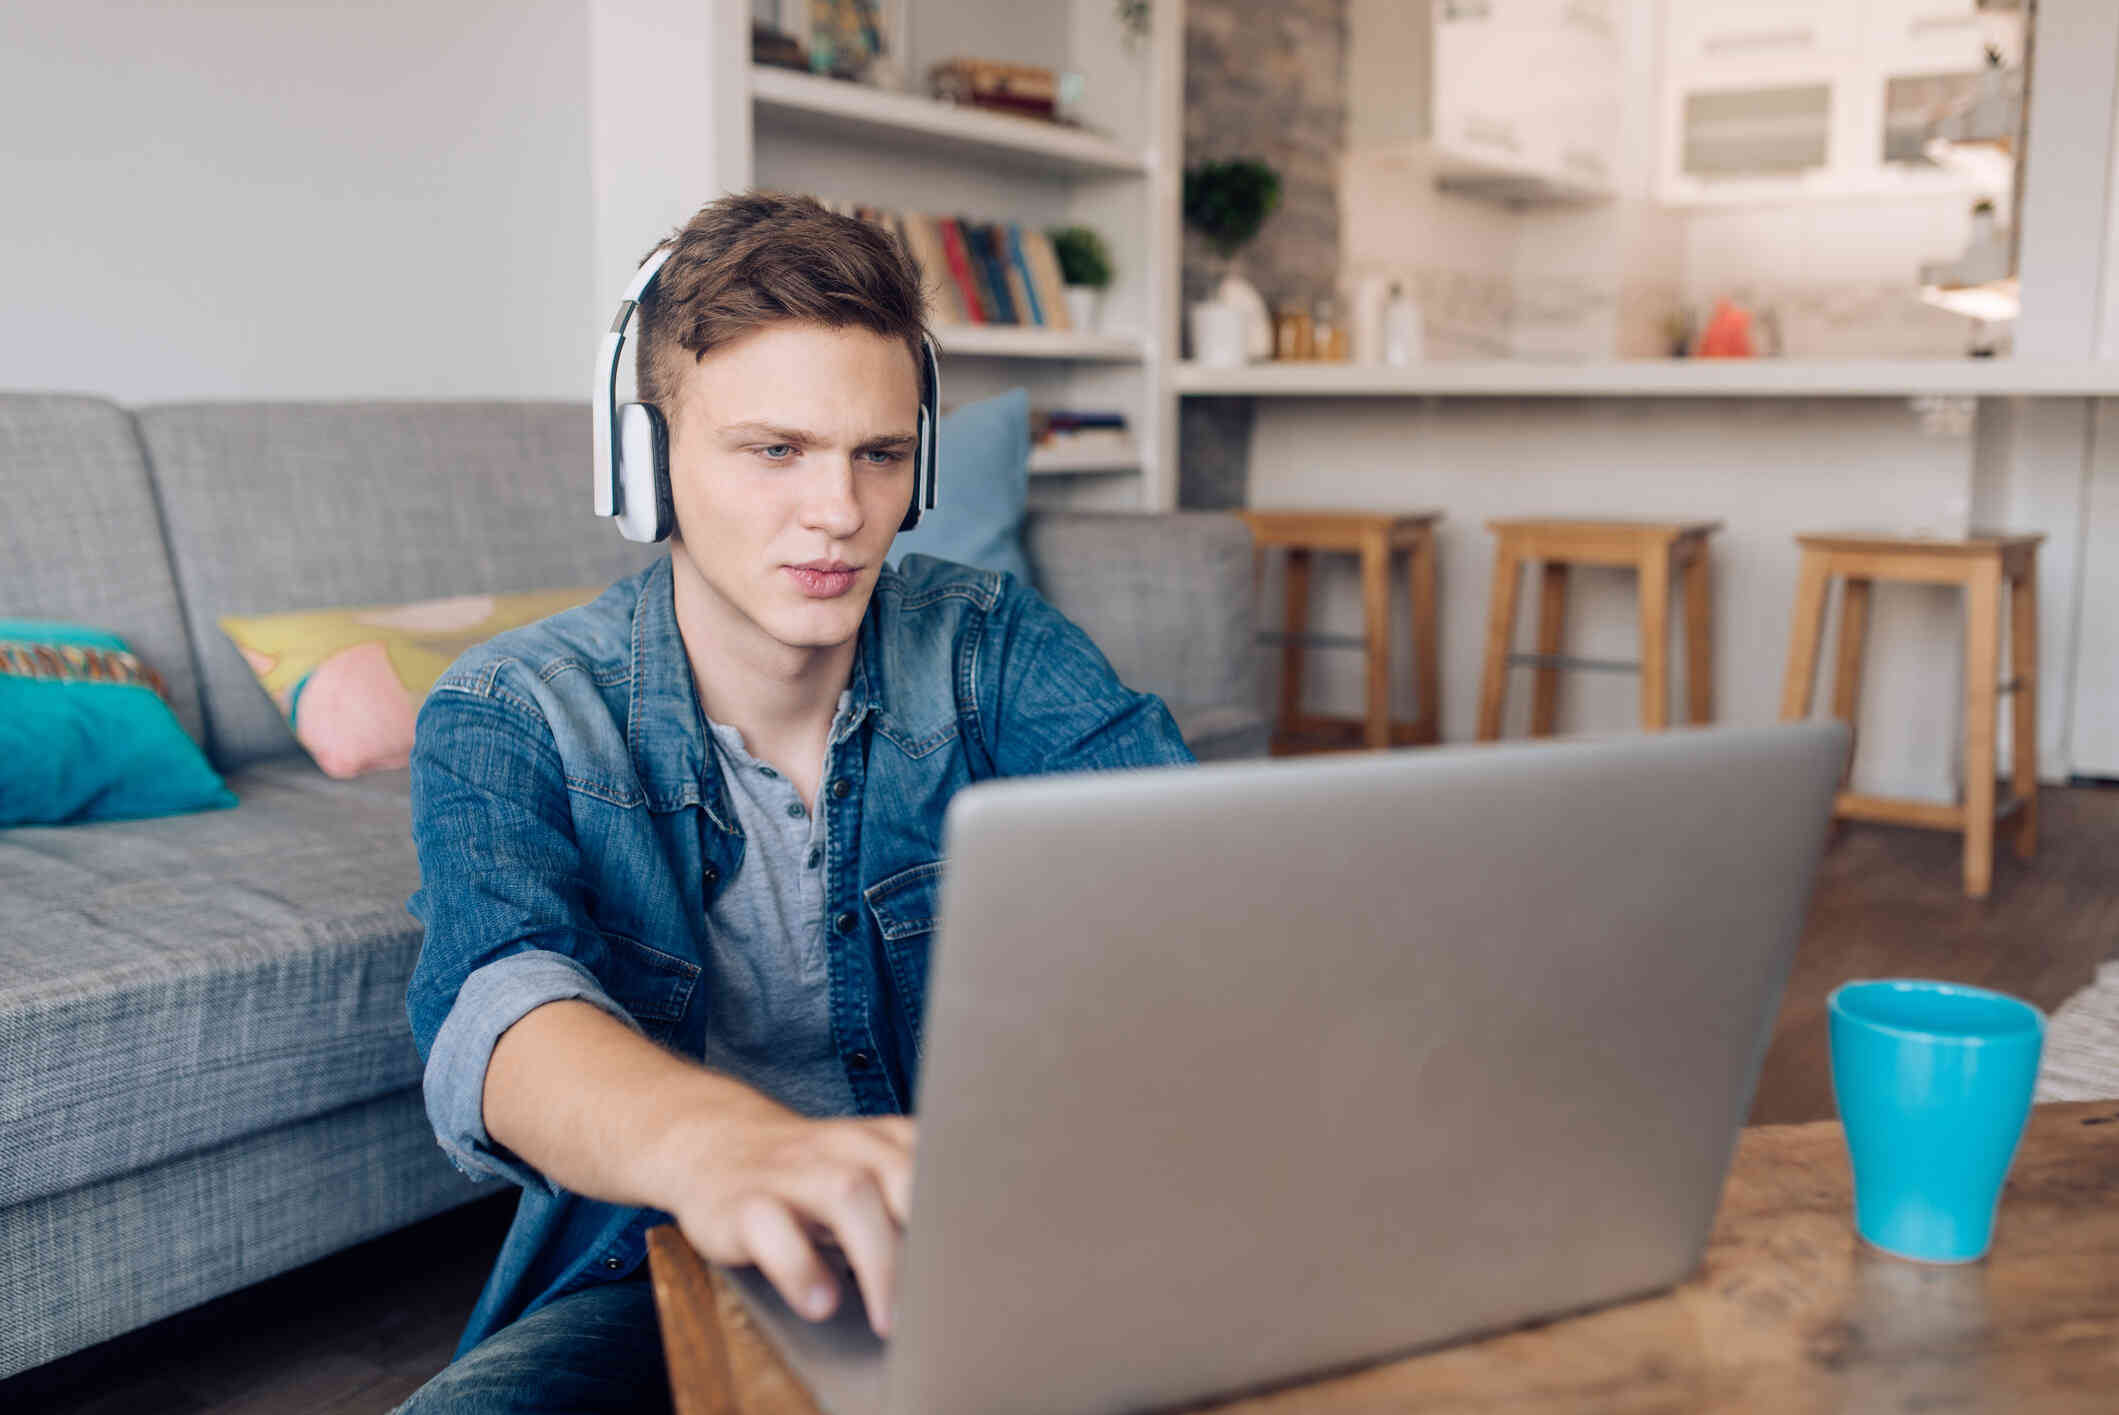 A teen boy in a blue jean shirt sits at a table with headphones on and types on the laptop open on the table infront of him.